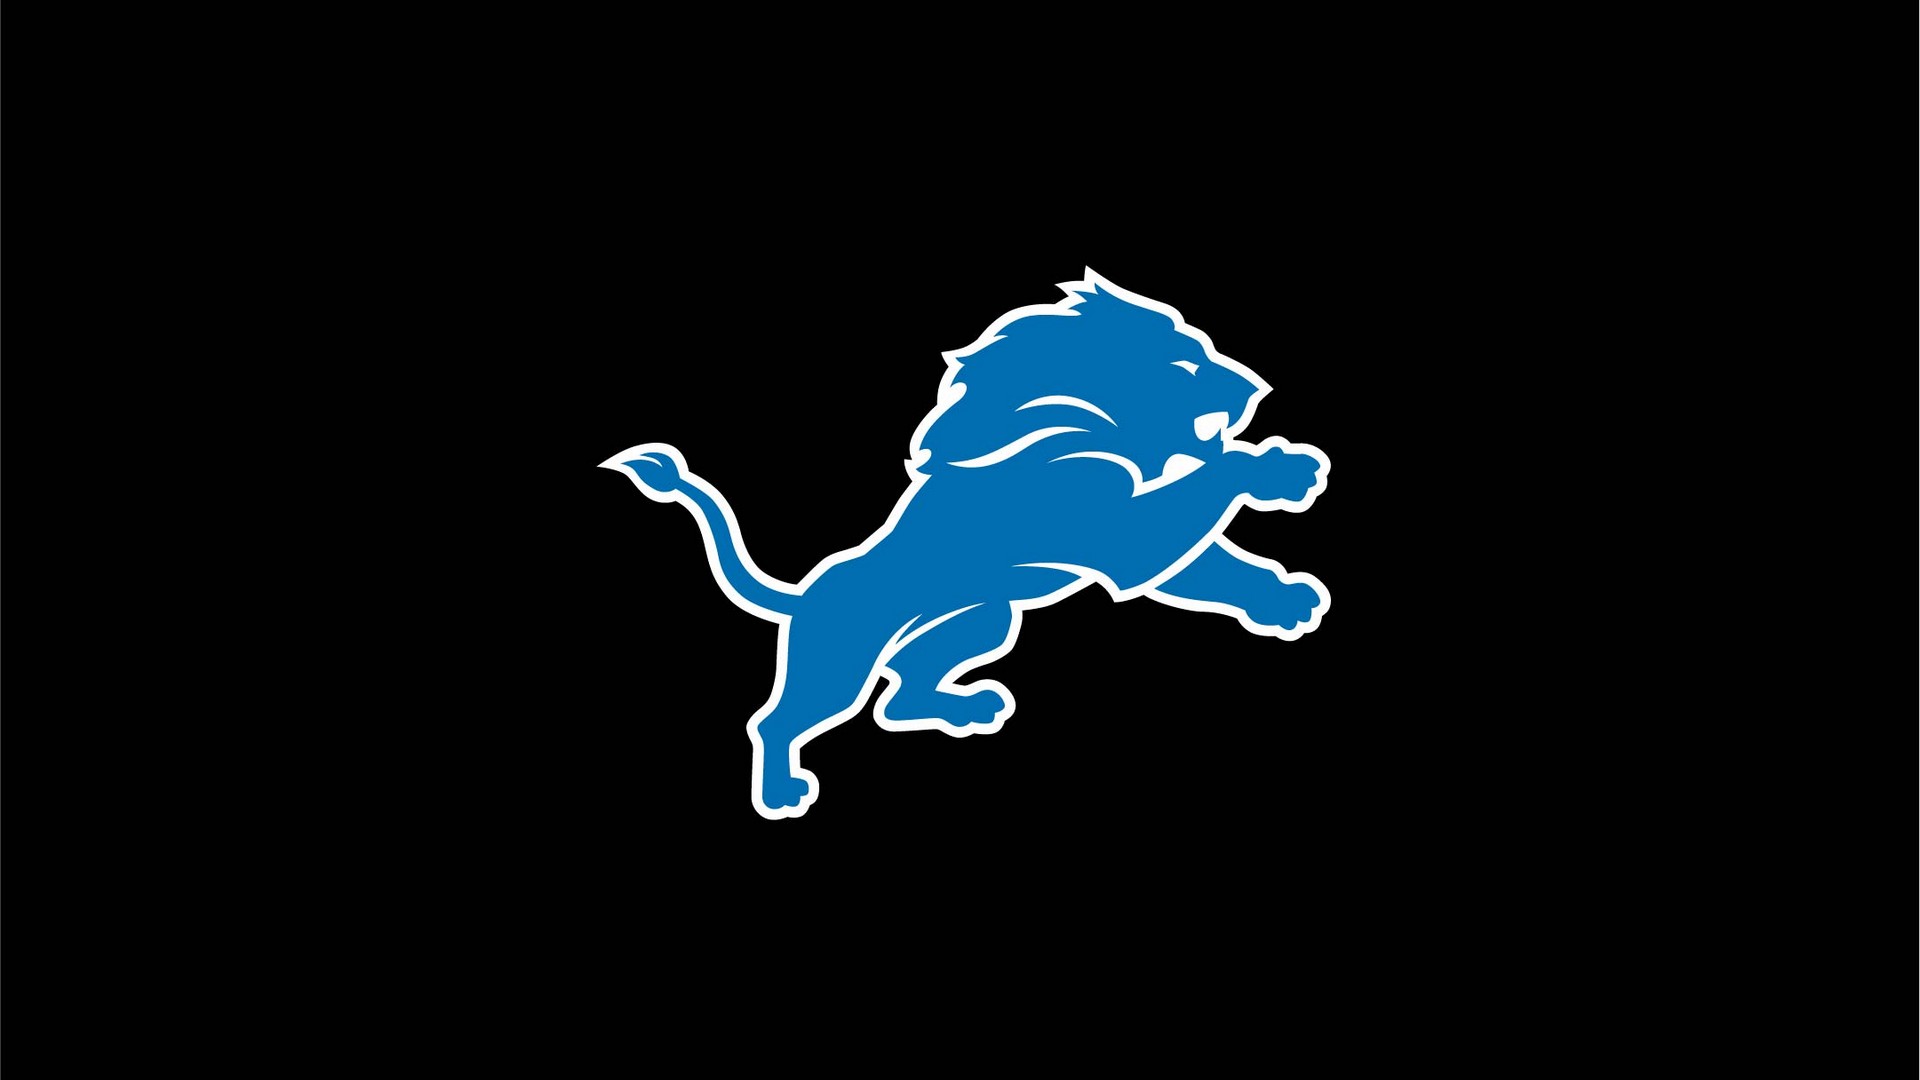 Detroit Lions NFL Wallpaper HD With high-resolution 1920X1080 pixel. You can use this wallpaper for your Mac or Windows Desktop Background, iPhone, Android or Tablet and another Smartphone device